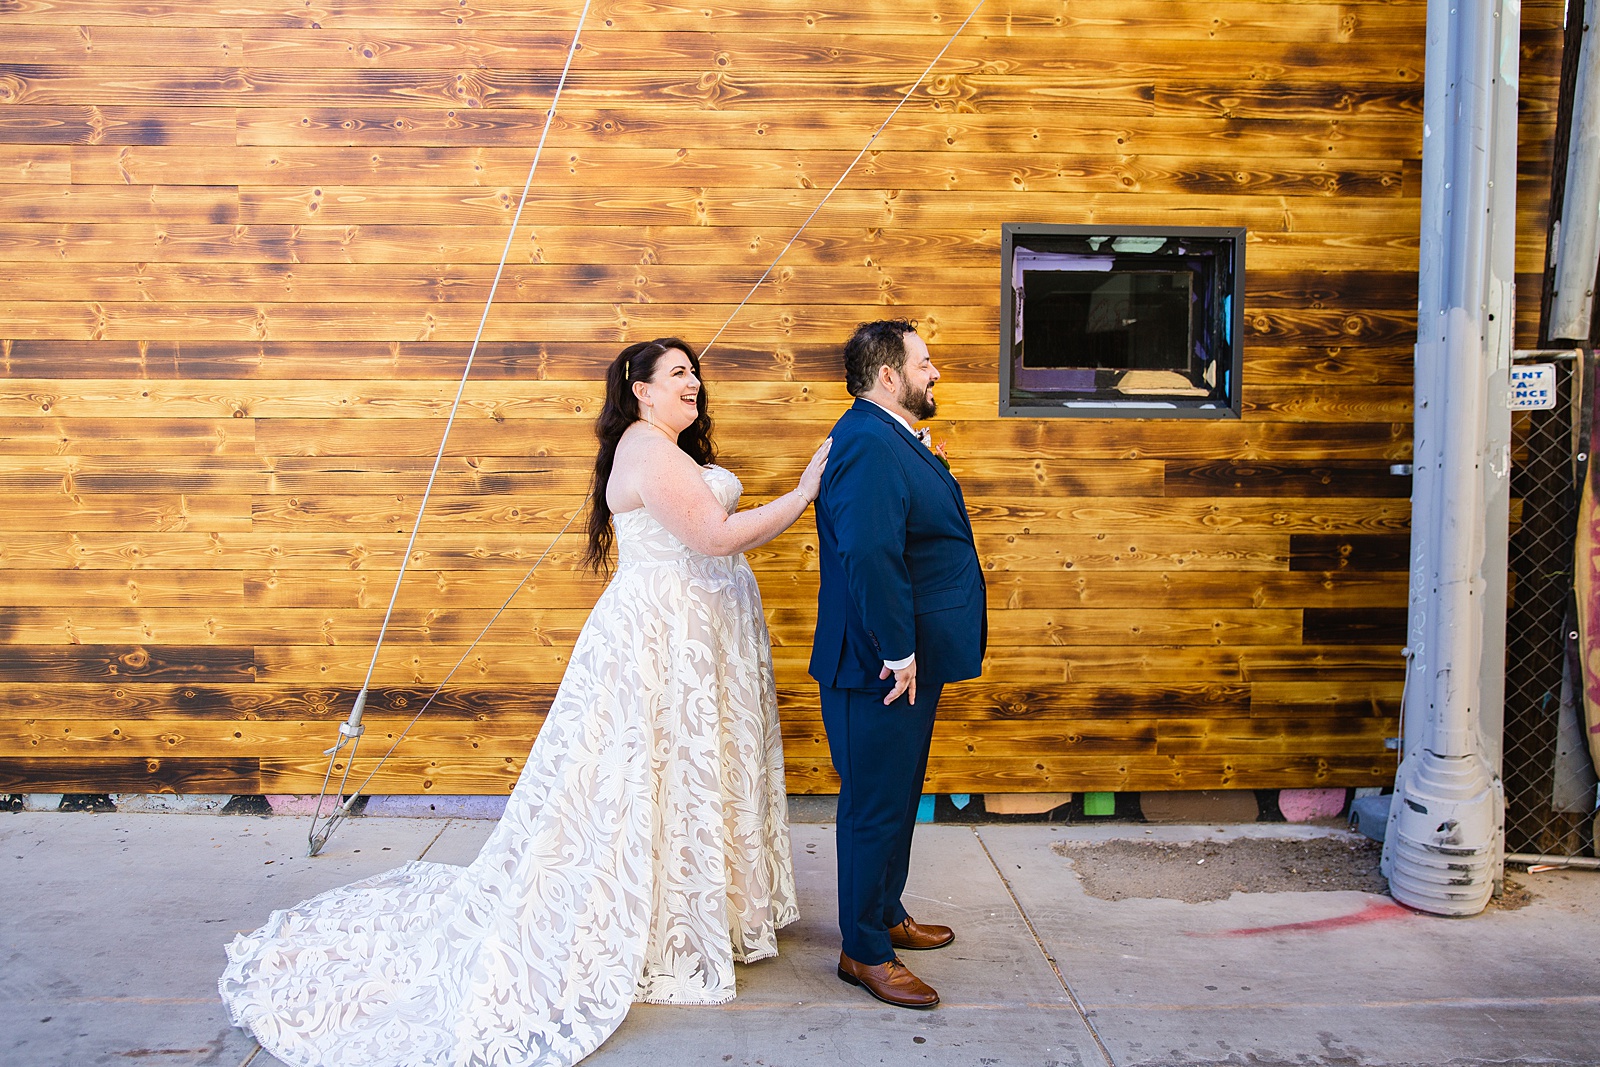 Bride and Groom's first look at MonOrchid by Phoenix wedding photographer PMA Photography.